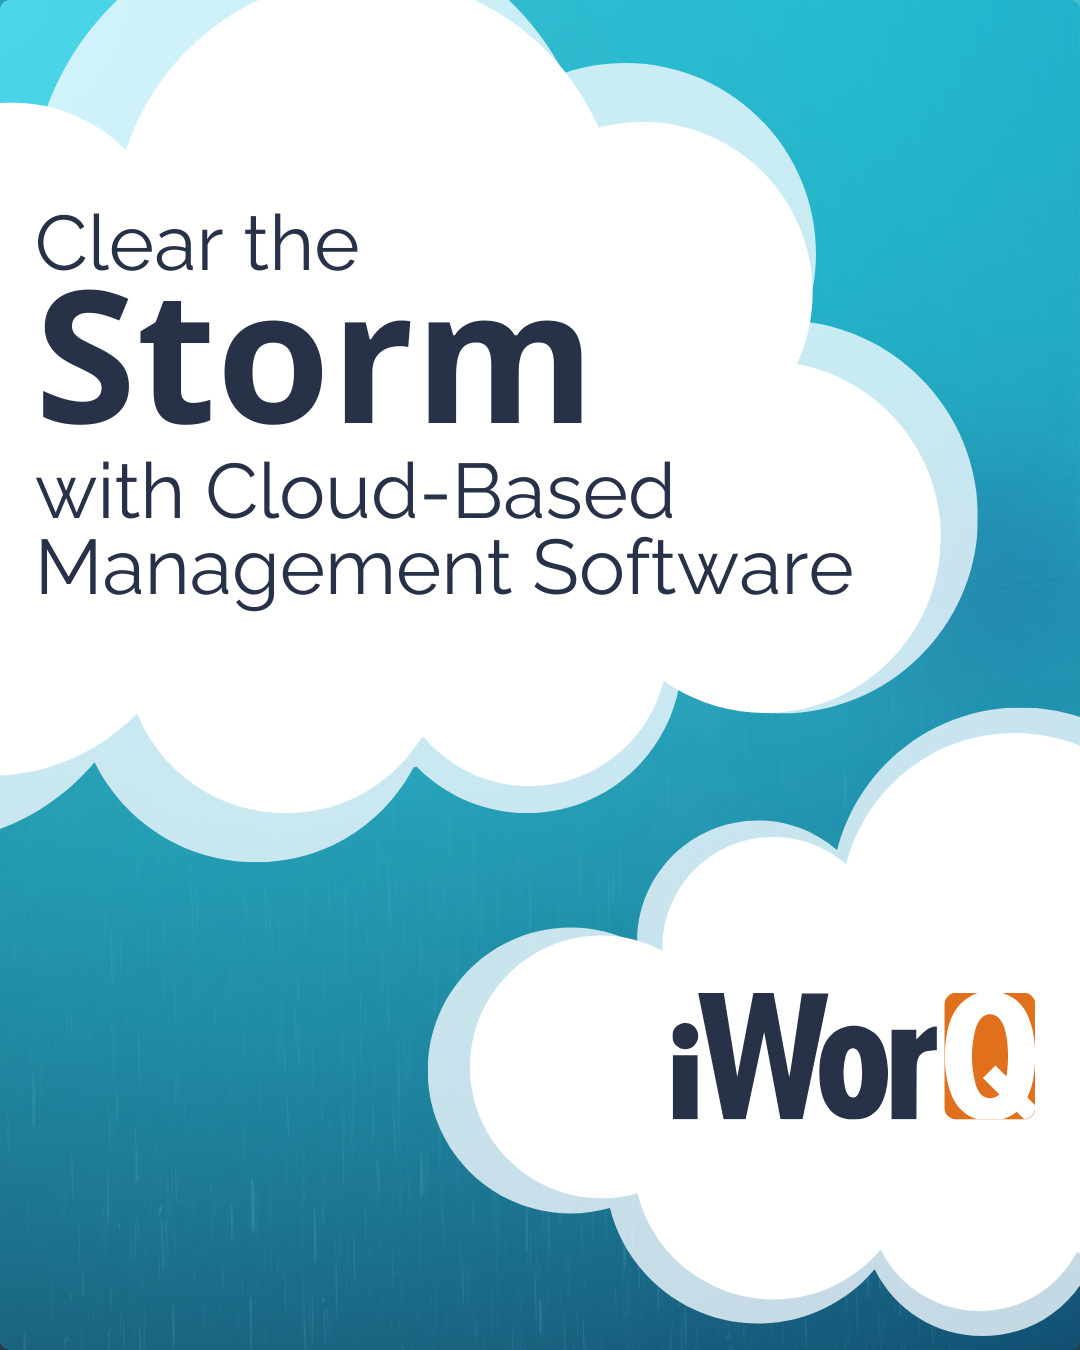 Clear the Storm with Cloud-Based Management Software